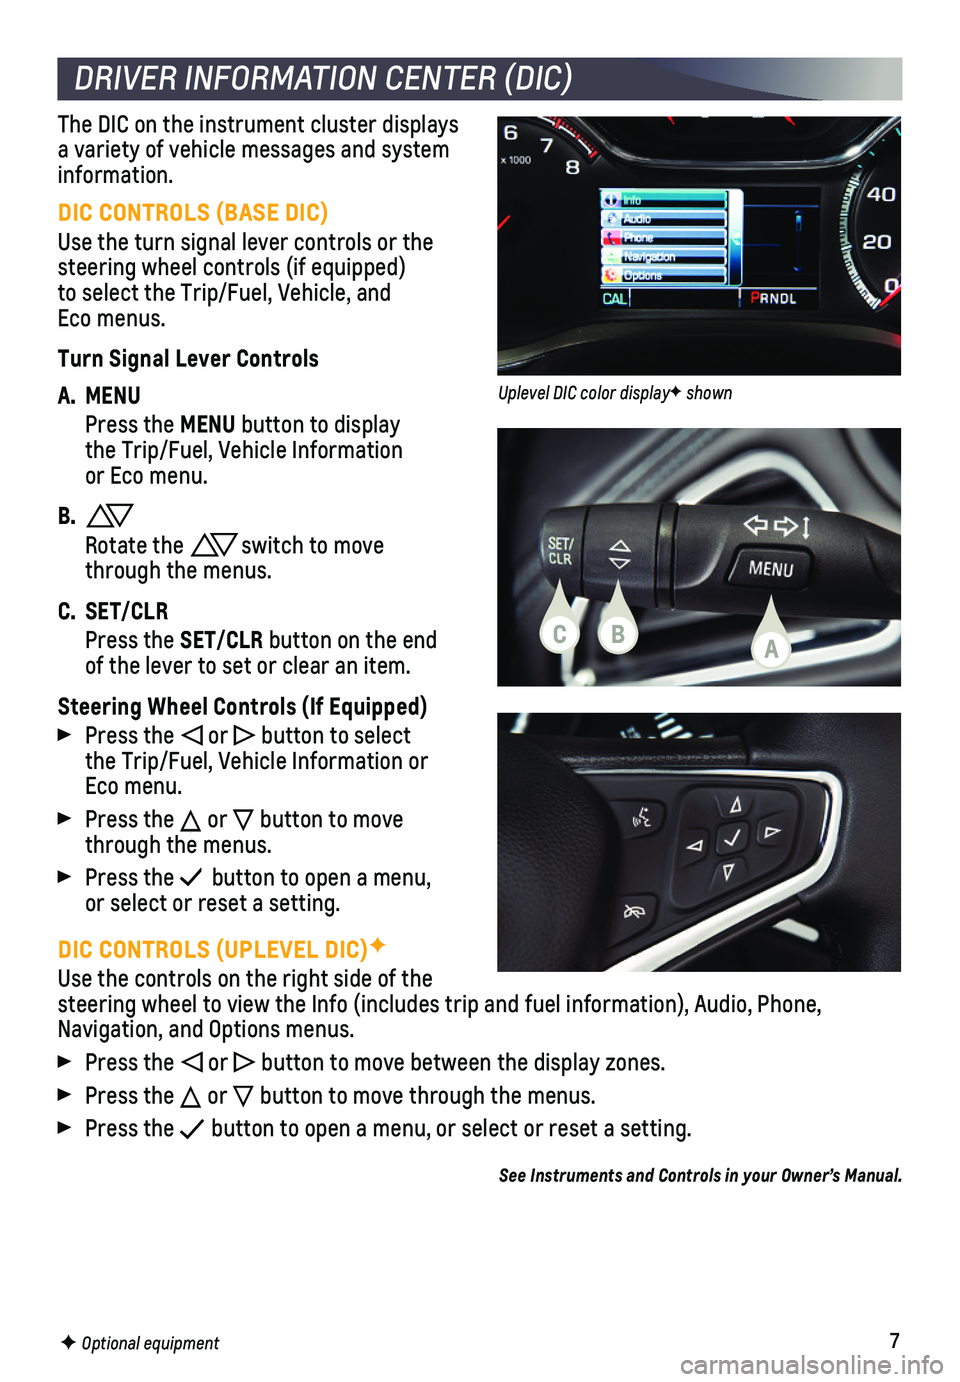 CHEVROLET CRUZE 2018  Get To Know Guide 7
DIC CONTROLS (UPLEVEL DIC)F
Use the controls on the right side of the steering wheel to view the Info (includes trip and fuel information), \
Audio, Phone, Navigation, and Options menus. 
 Press the